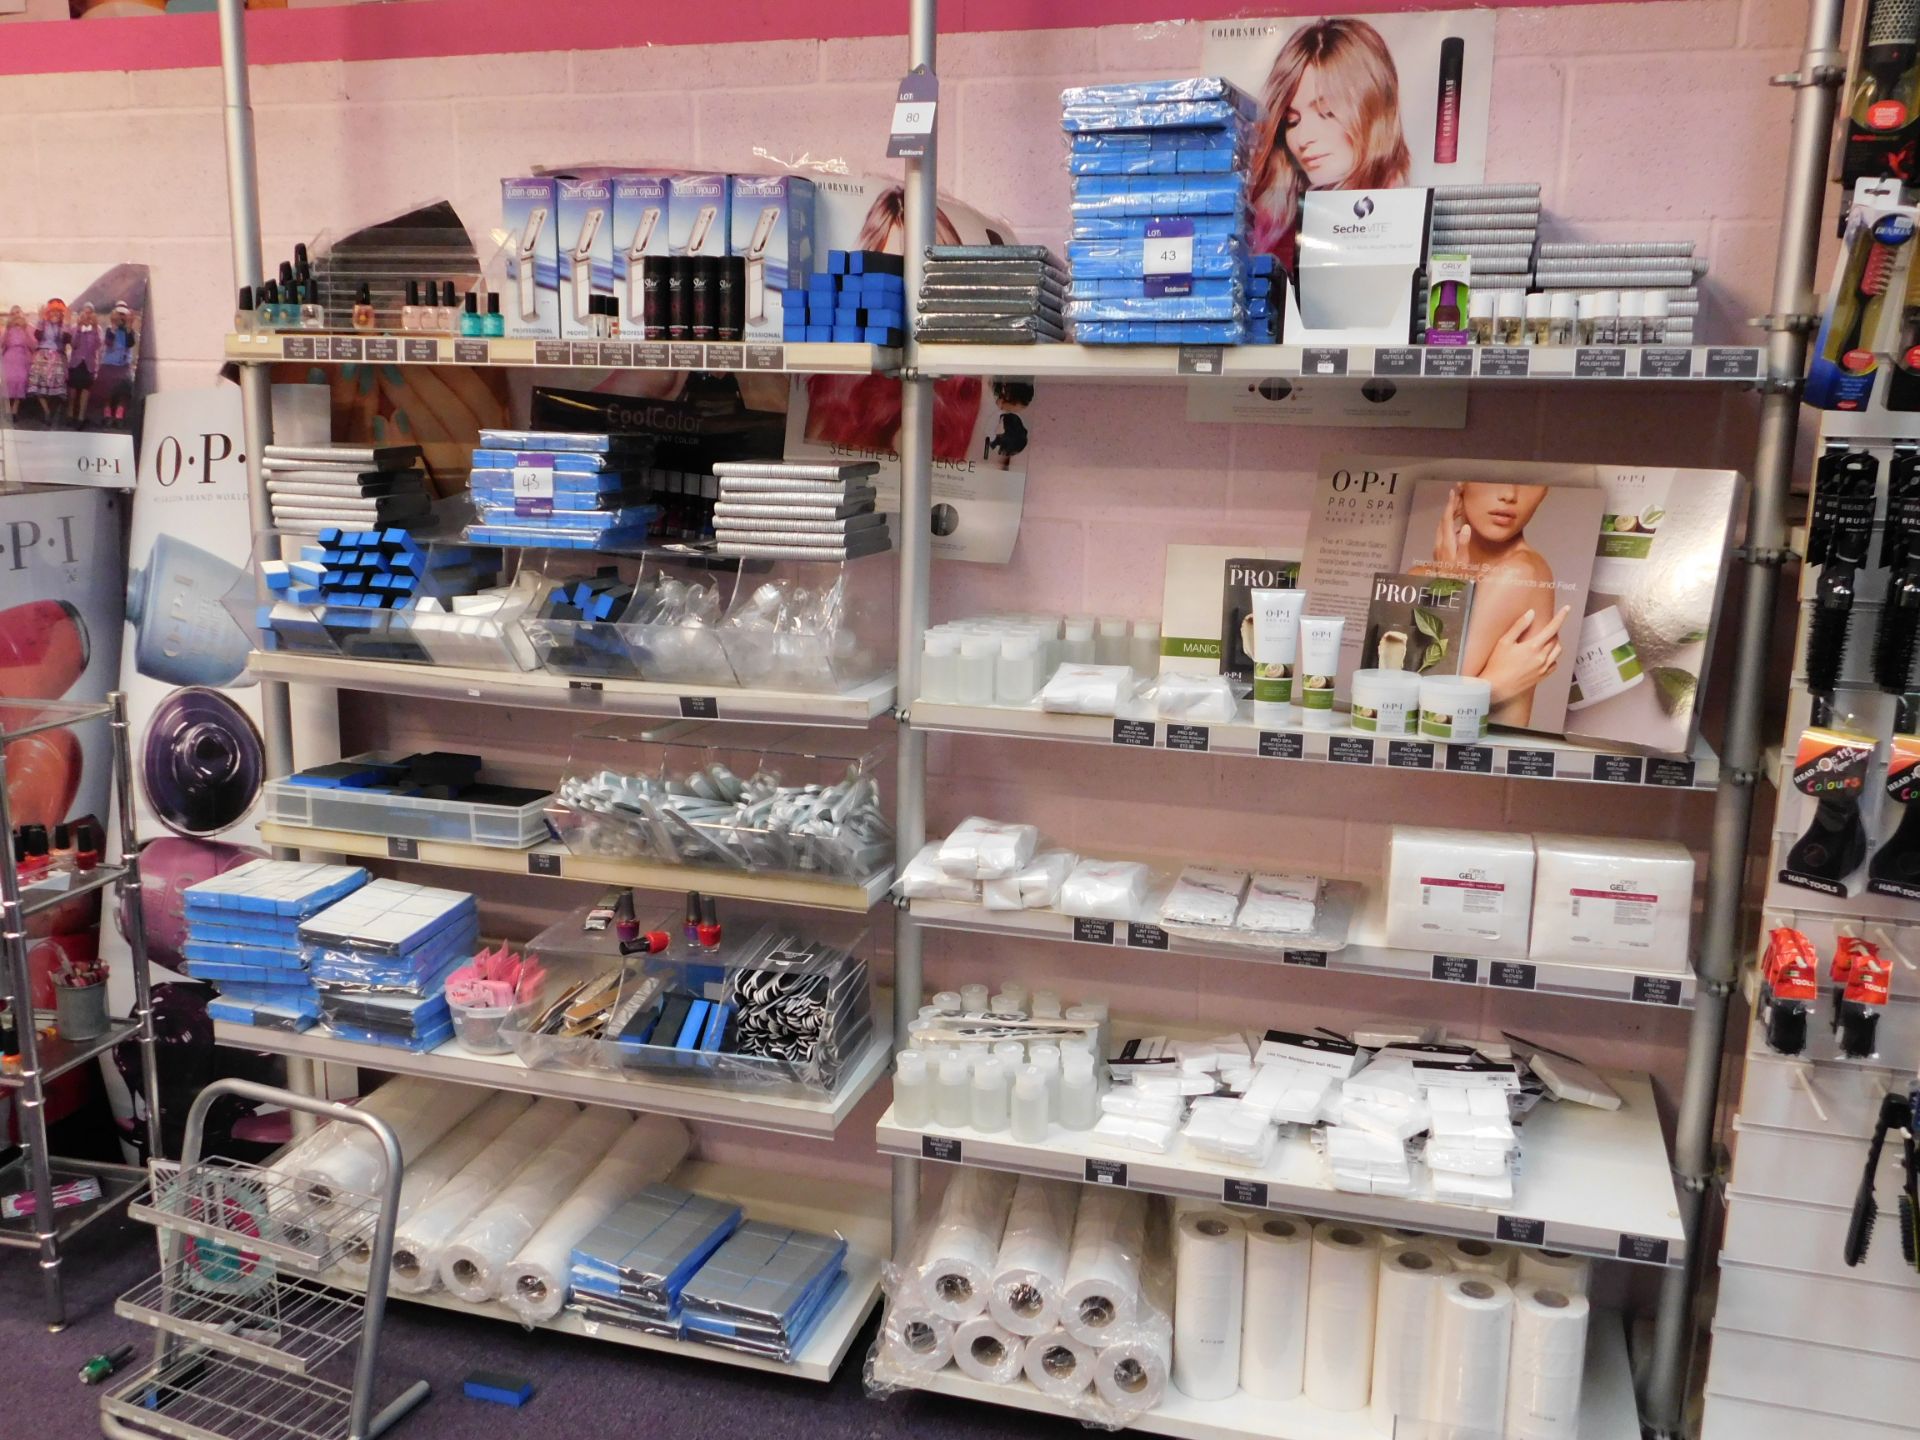 Contents to 2 bays of shop display shelving, to include assortment of nail treatment products (